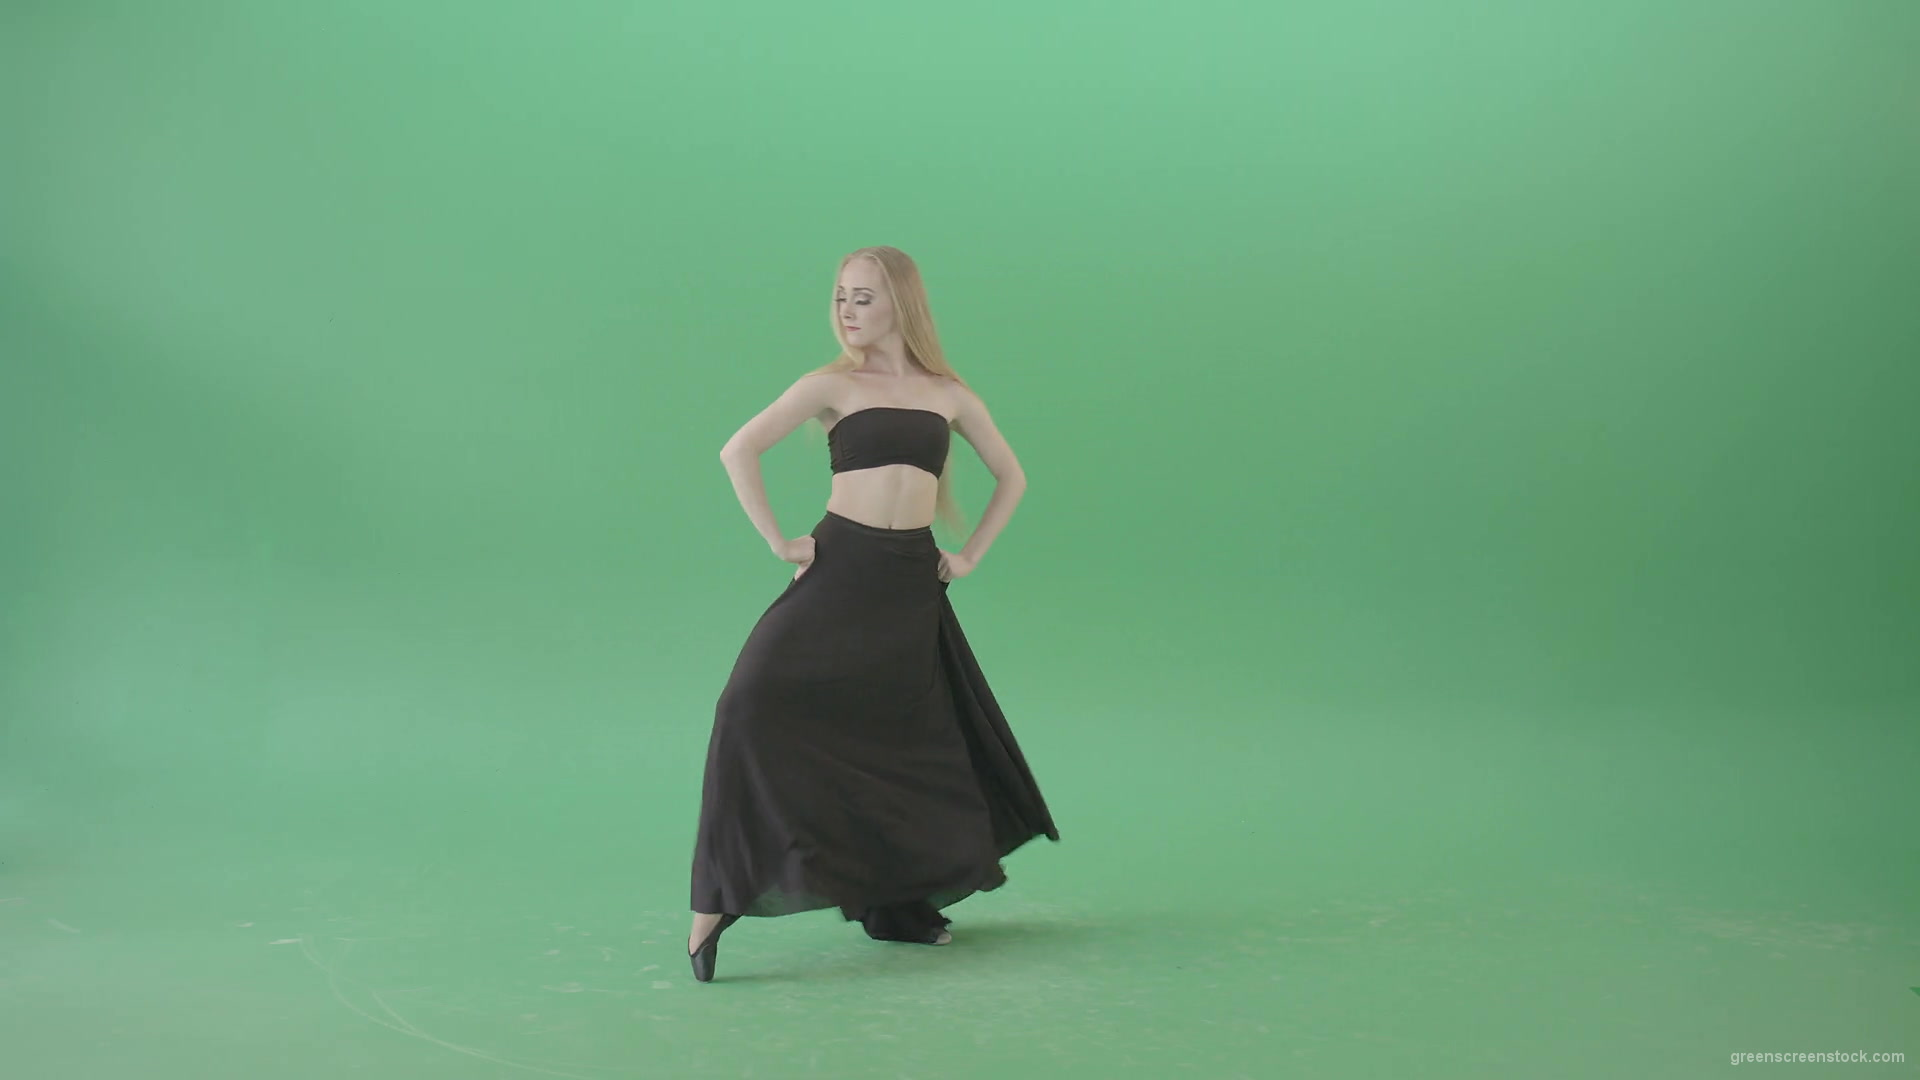 Hot-passion-ballet-girl-in-black-dress-dancing-on-green-screen-4K-Video-Footage-1920_004 Green Screen Stock